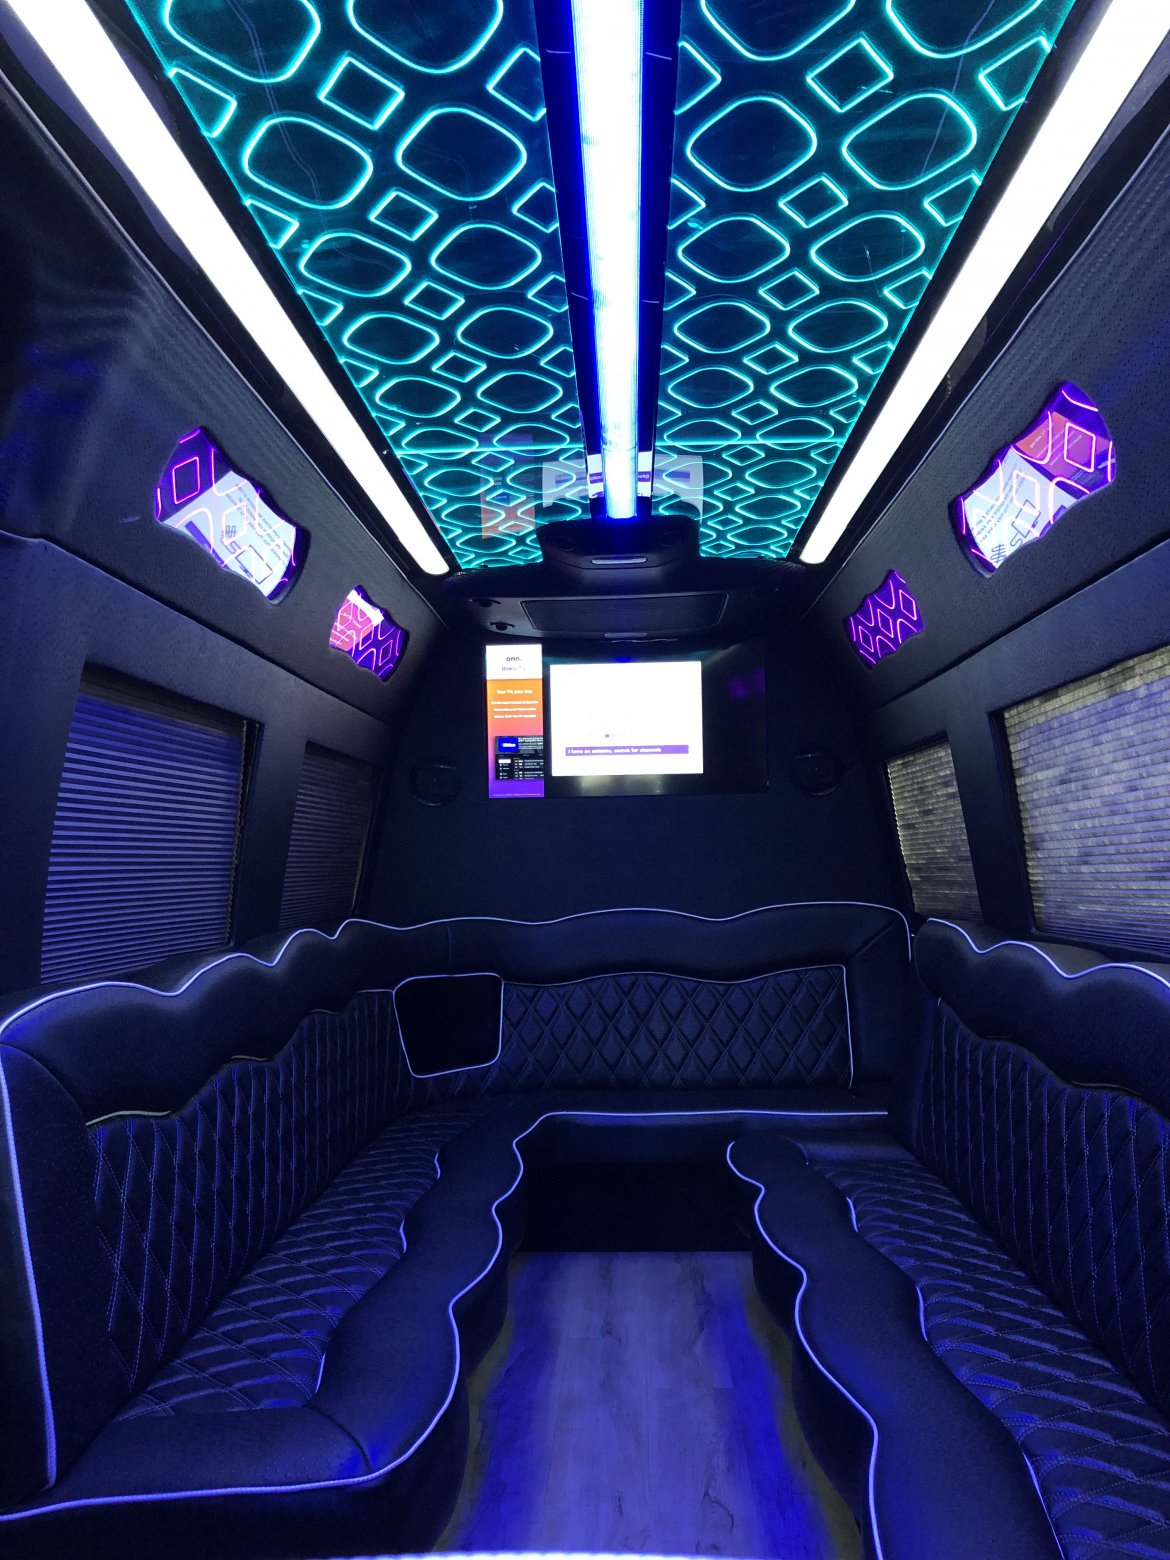 Limo Bus for sale: 2022 Mercedes-Benz Sprinter by Party bus limo